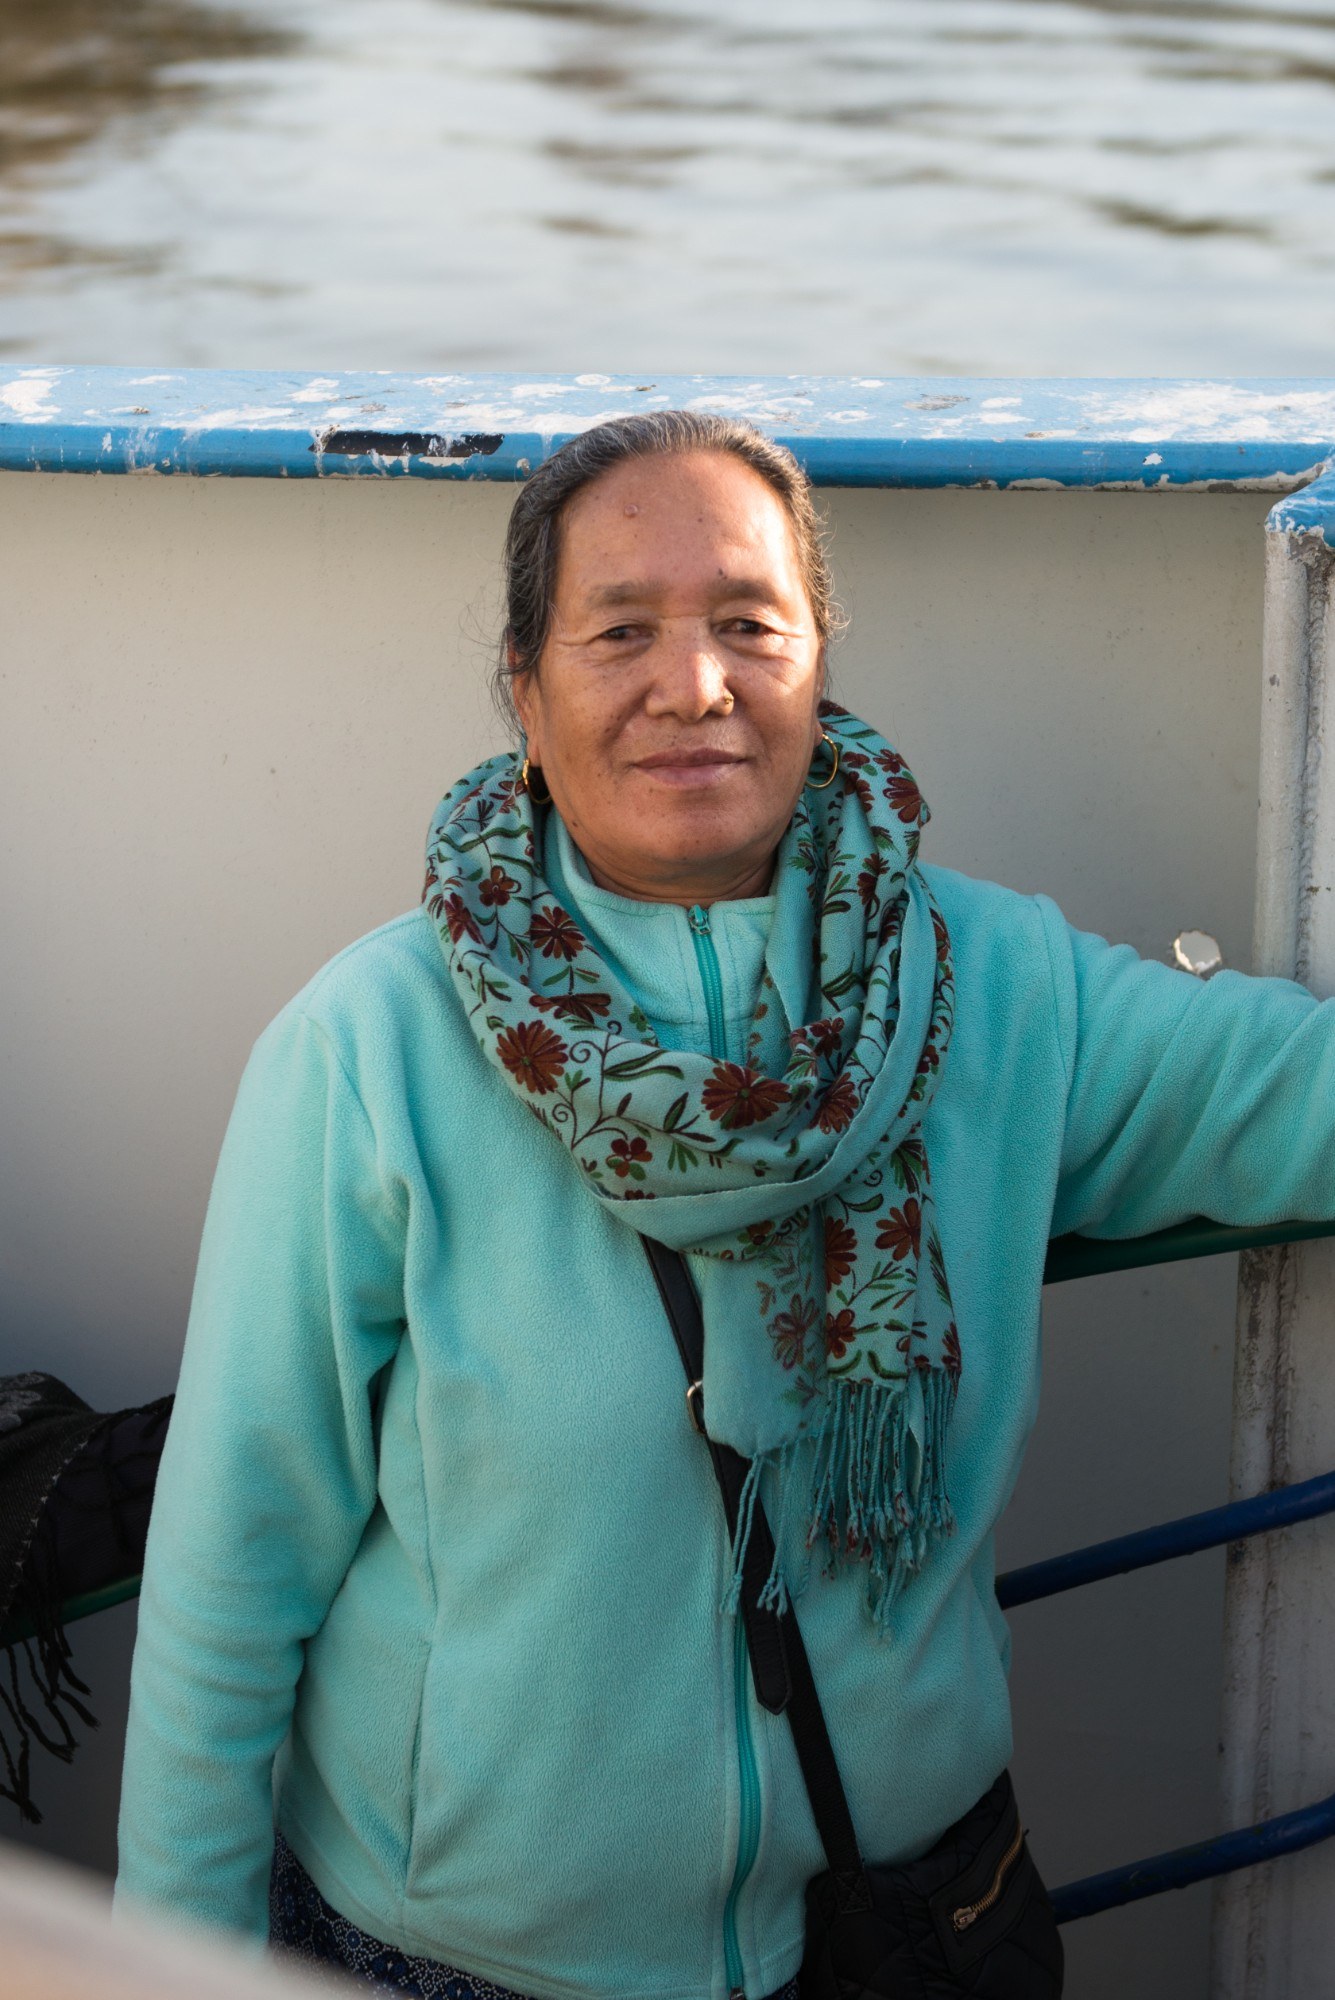 Portrait of woman on the ferry.